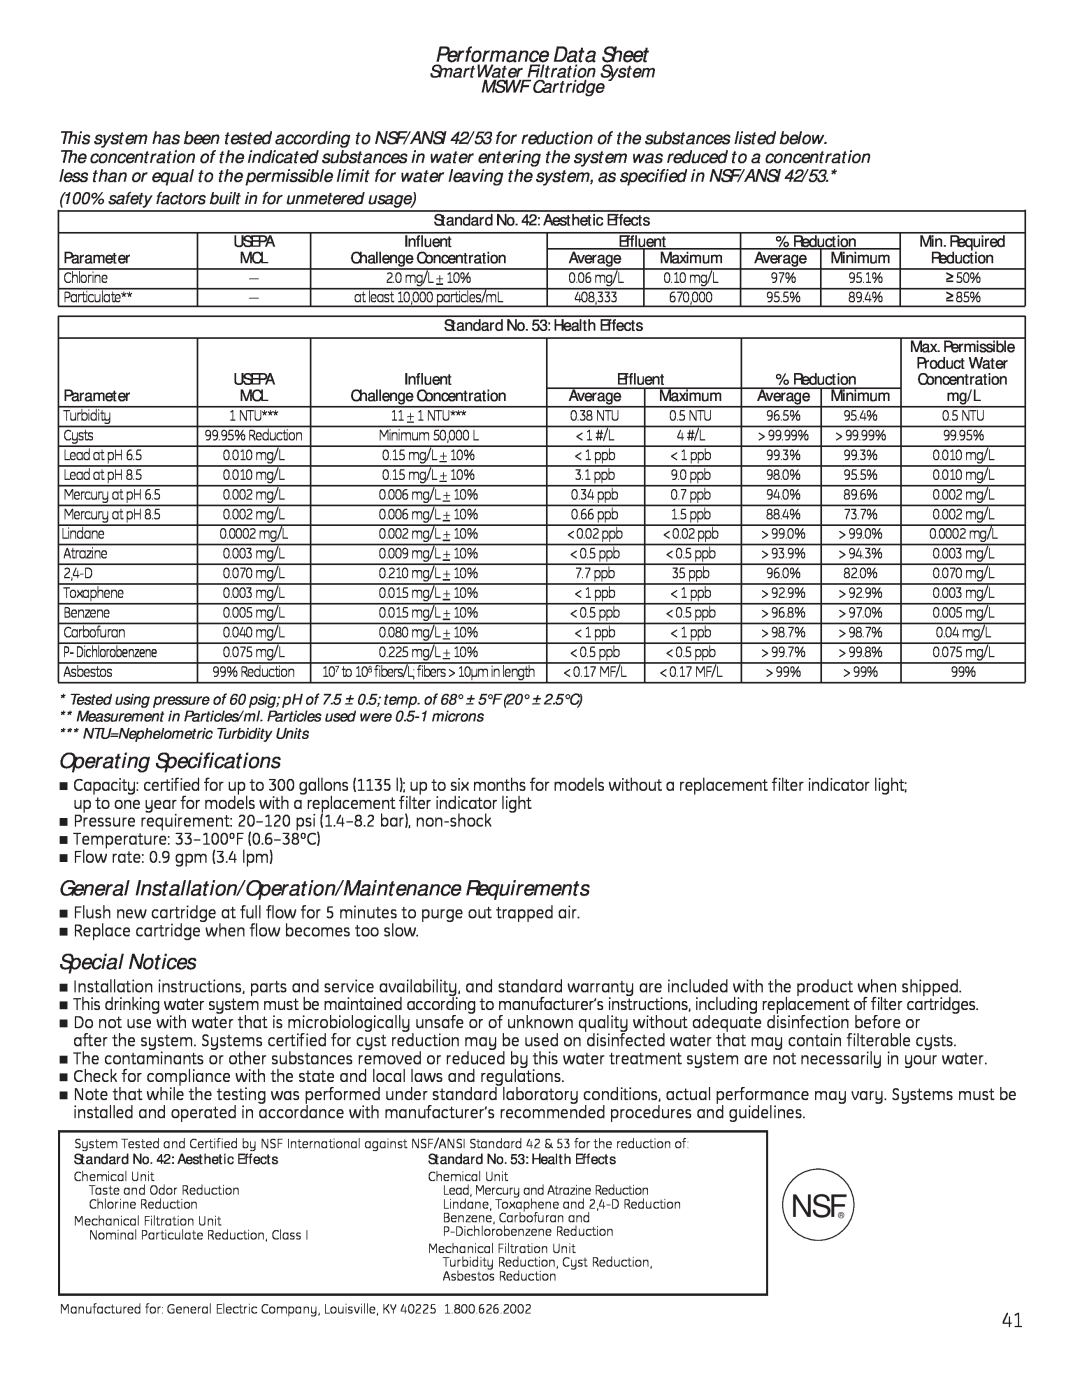 GE 200D8074P050 Performance Data Sheet, Operating Specifications, General Installation/Operation/Maintenance Requirements 